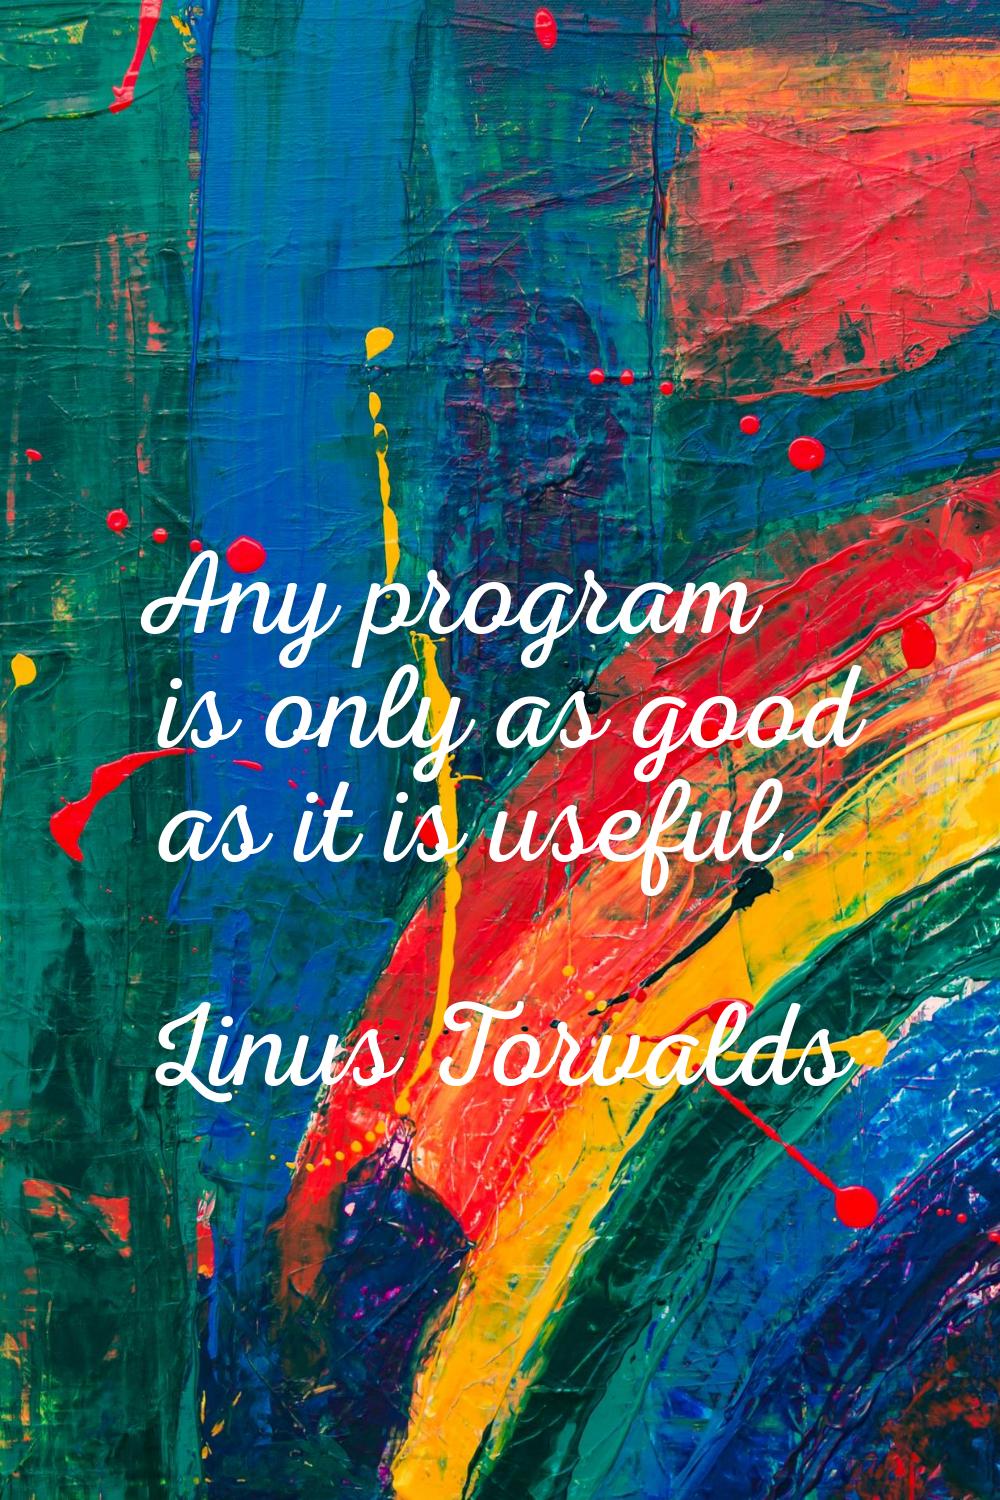 Any program is only as good as it is useful.